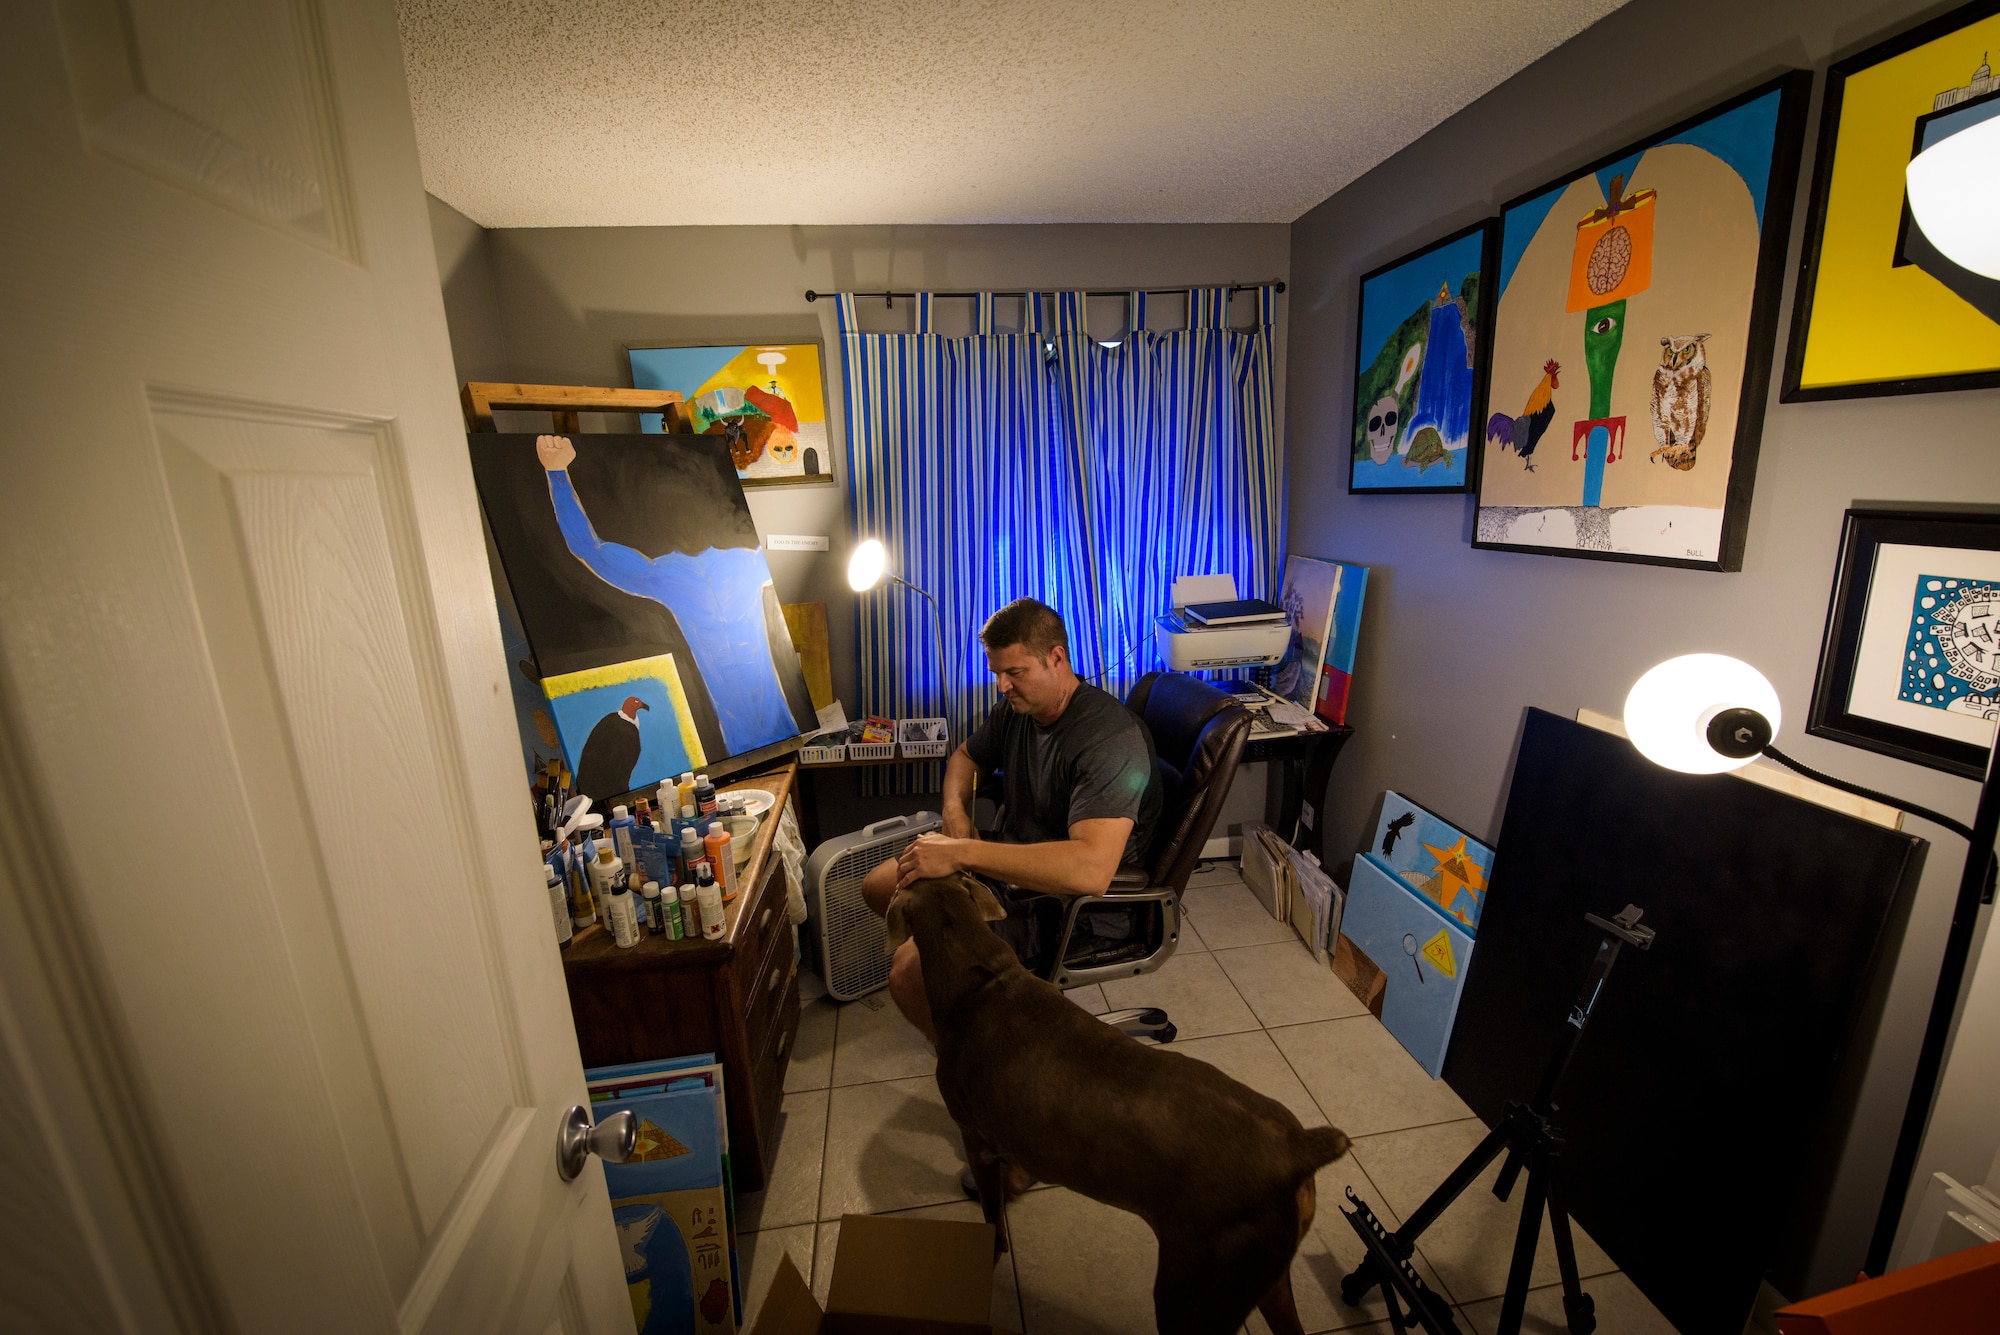 Officer Tim Bull, a Combat Arms Training and Maintenance instructor, pets his dog, Harley, in between painting, April 24, 2018, in Palm Bay, Fla. Bull is an artist and turned to art as an outlet and release. Bull has a unique art style that combines the surreal with earnest, thought provoking messages. "It took me 37 years to find out what I wanted to do and this is it" (U.S. Air Force photo by Airman 1st Class Dalton Williams)